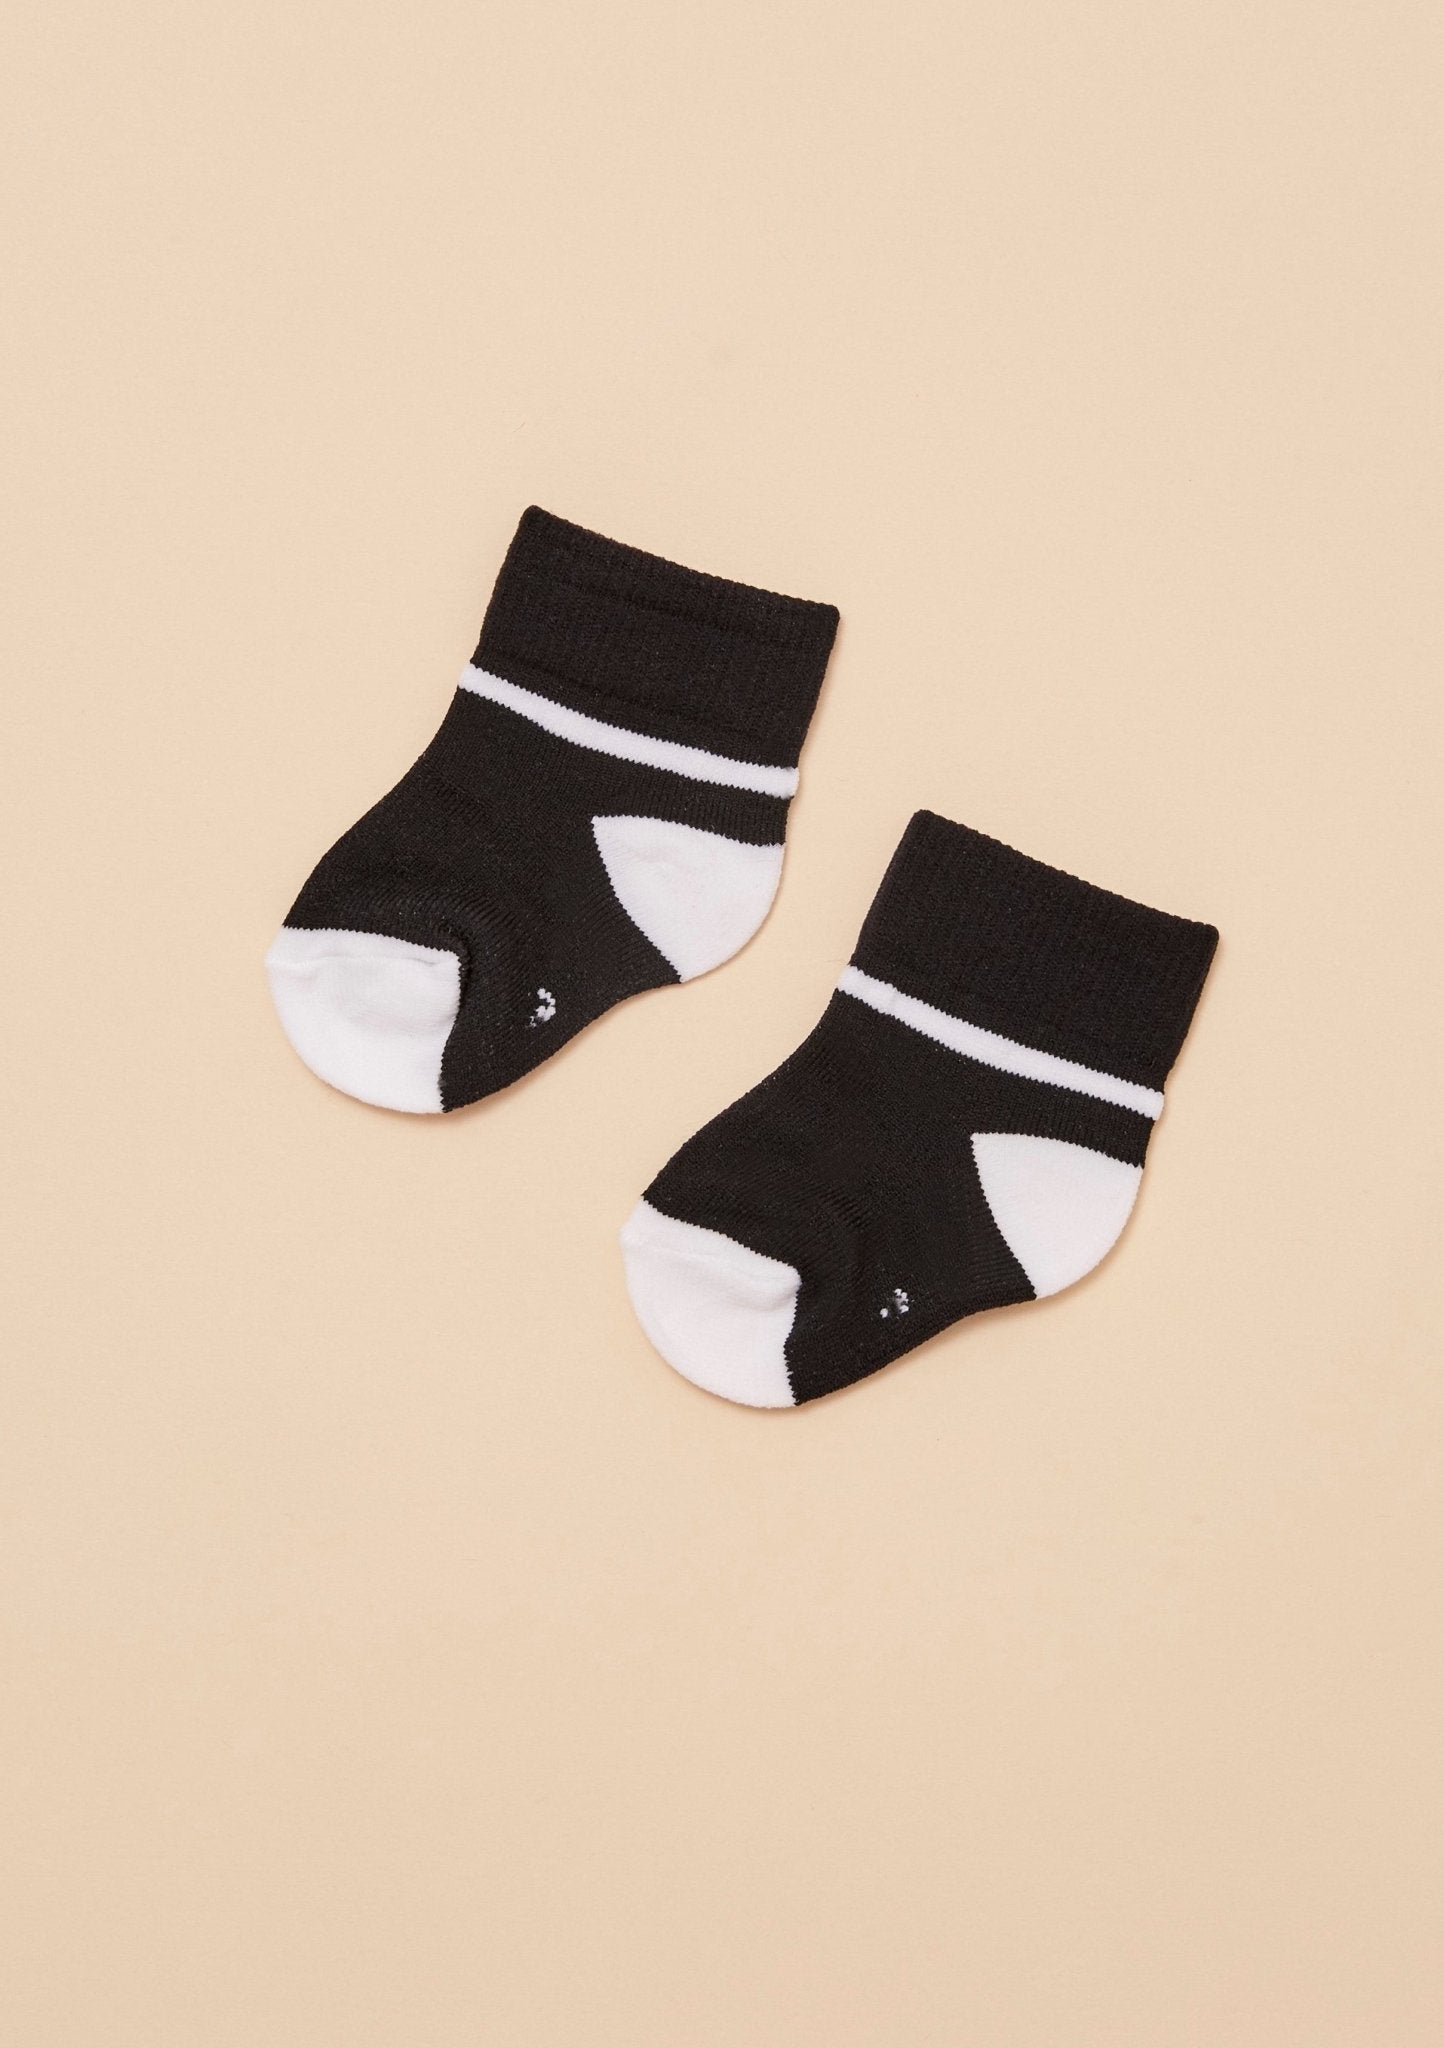 TheRY Black and white softest baby socks flatlay